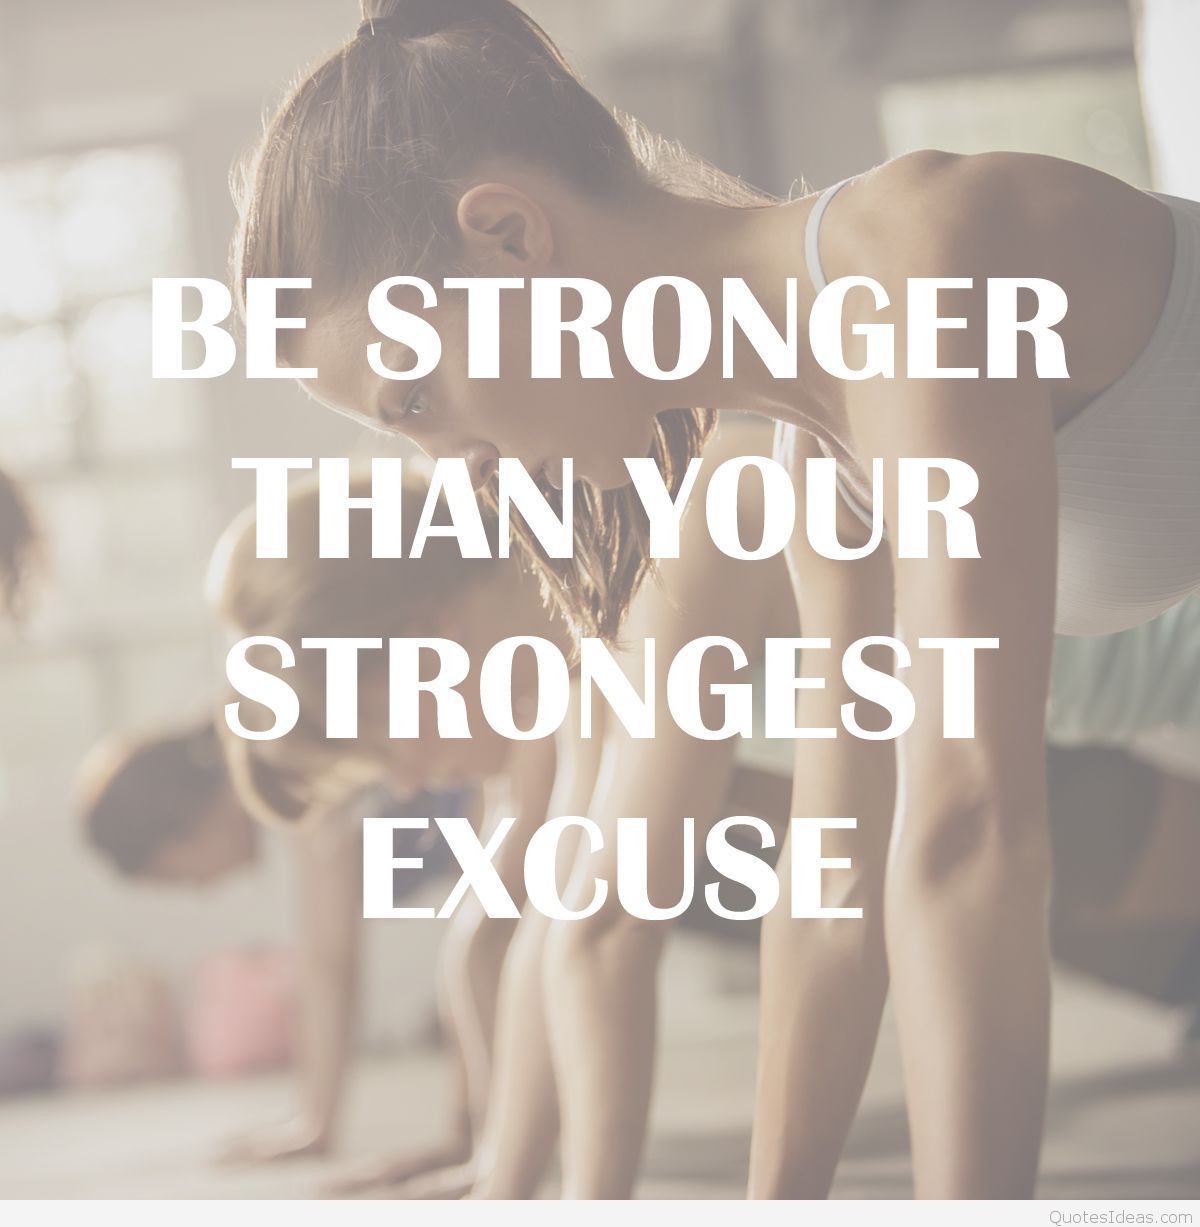 Fitness bodybuilding workouts quotes tumblr & instagram